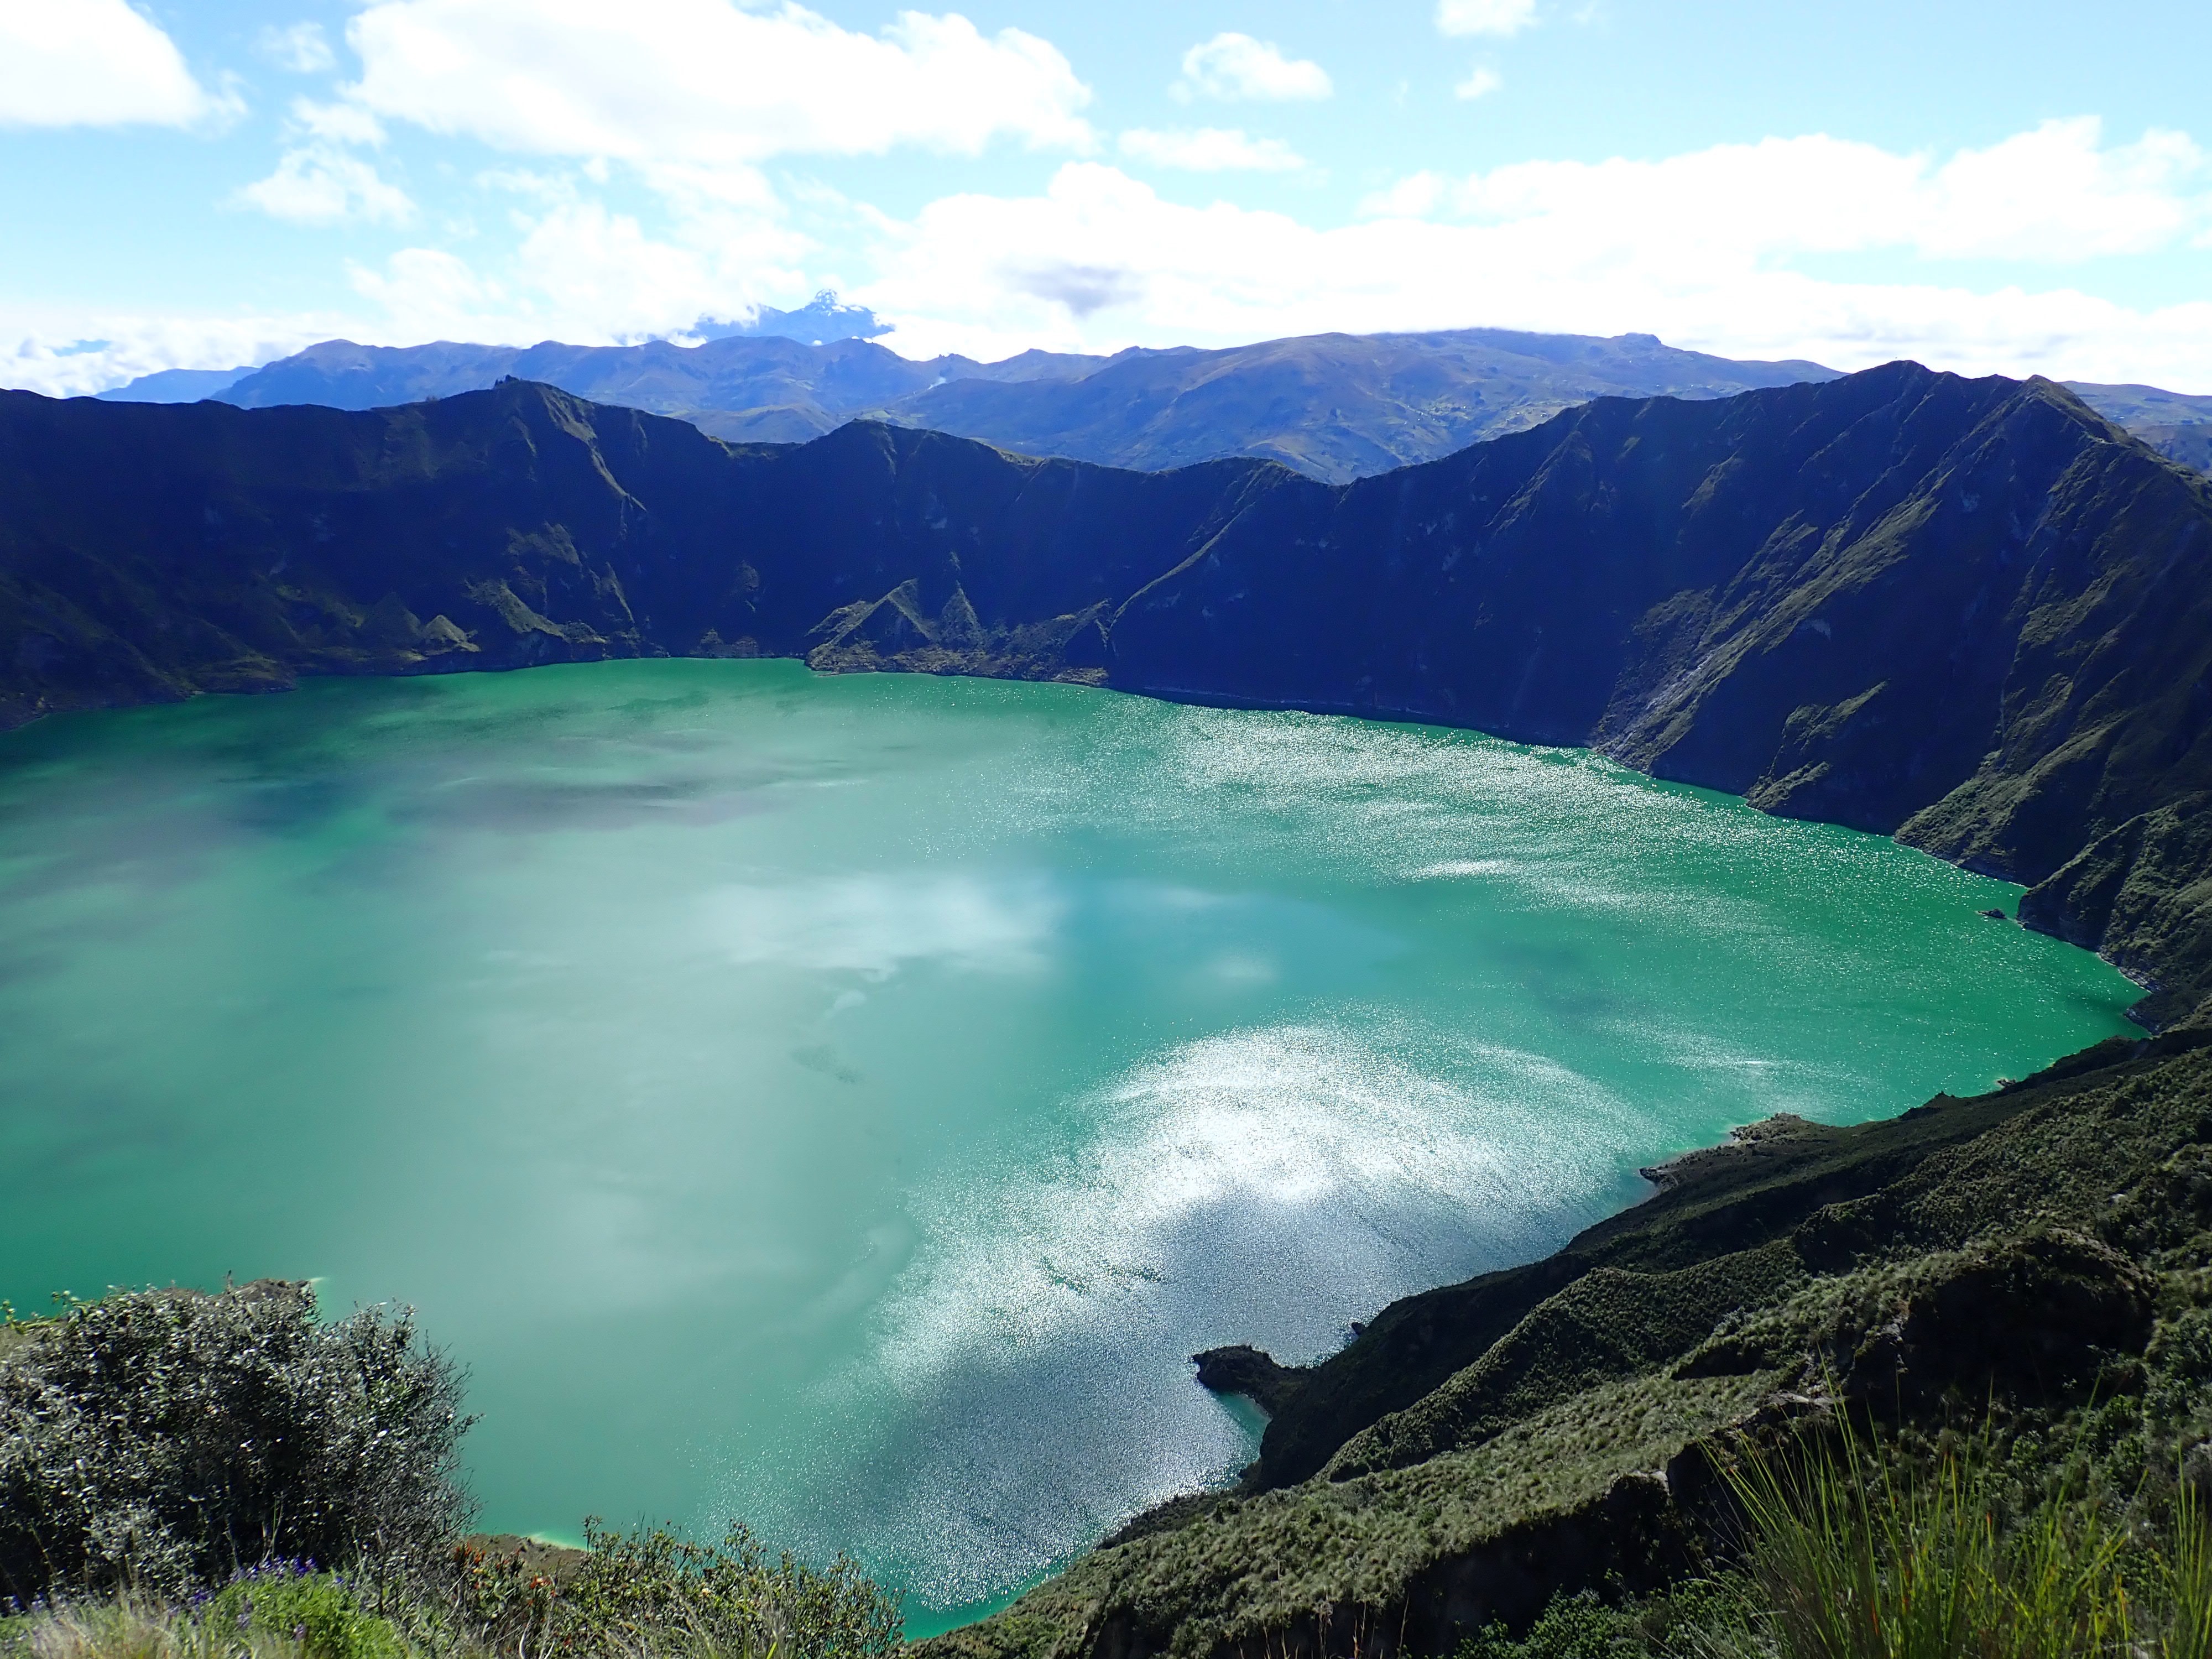 photo of a bright green lake in the crater of craggy ridges